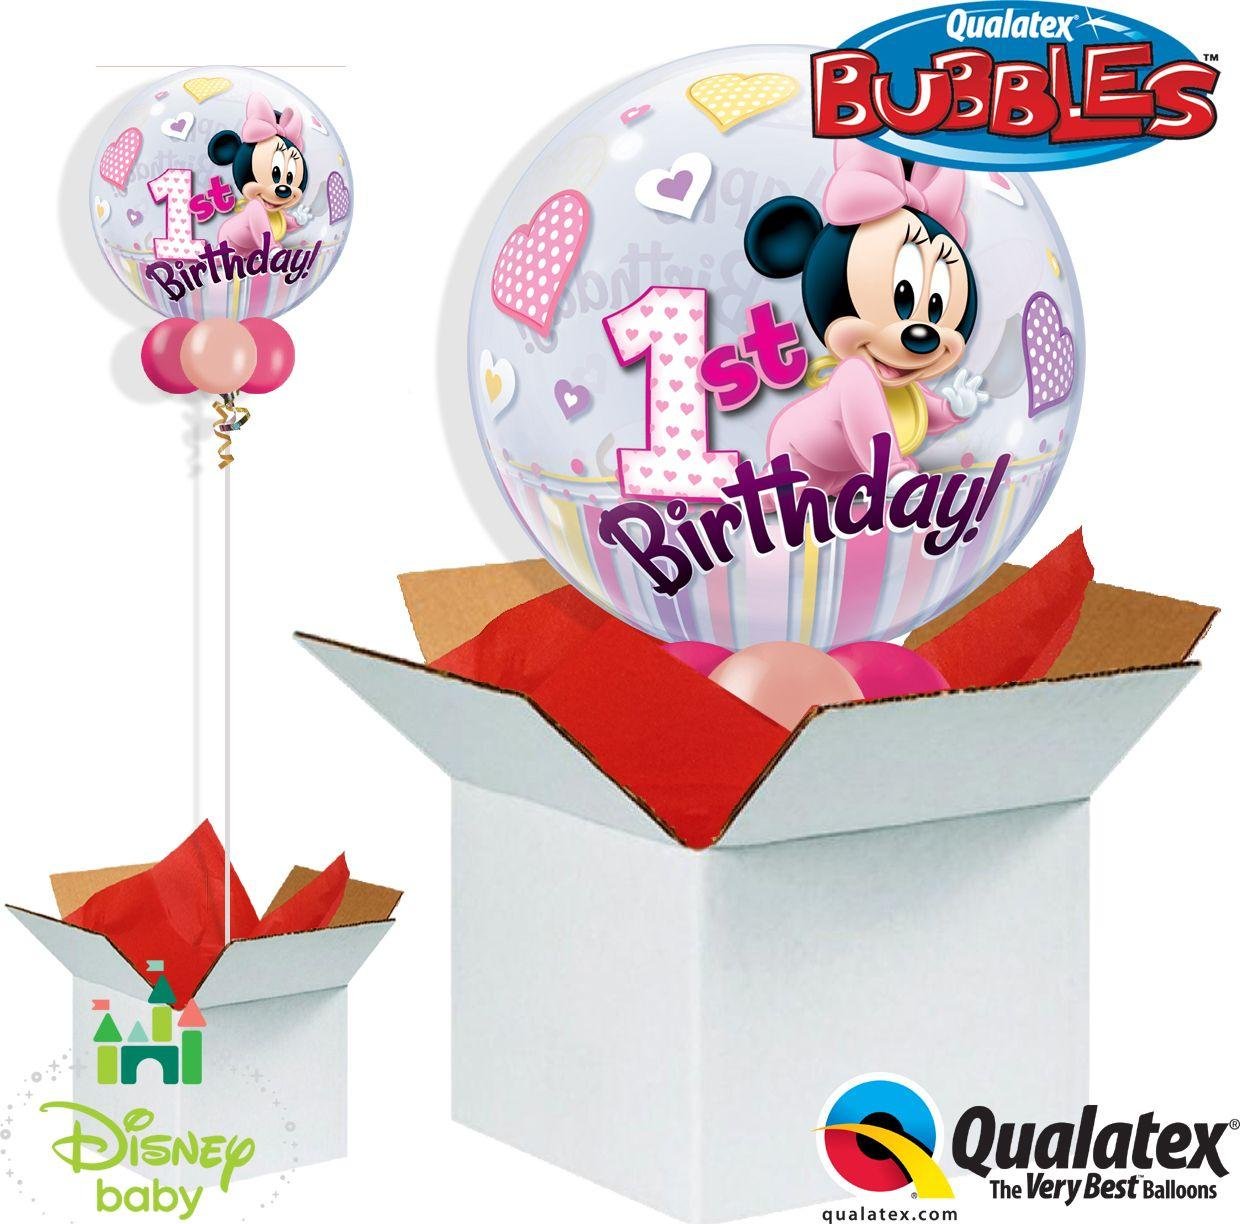 Disney Minnie Mouse 1st Birthday Bubble Balloon in a Box.